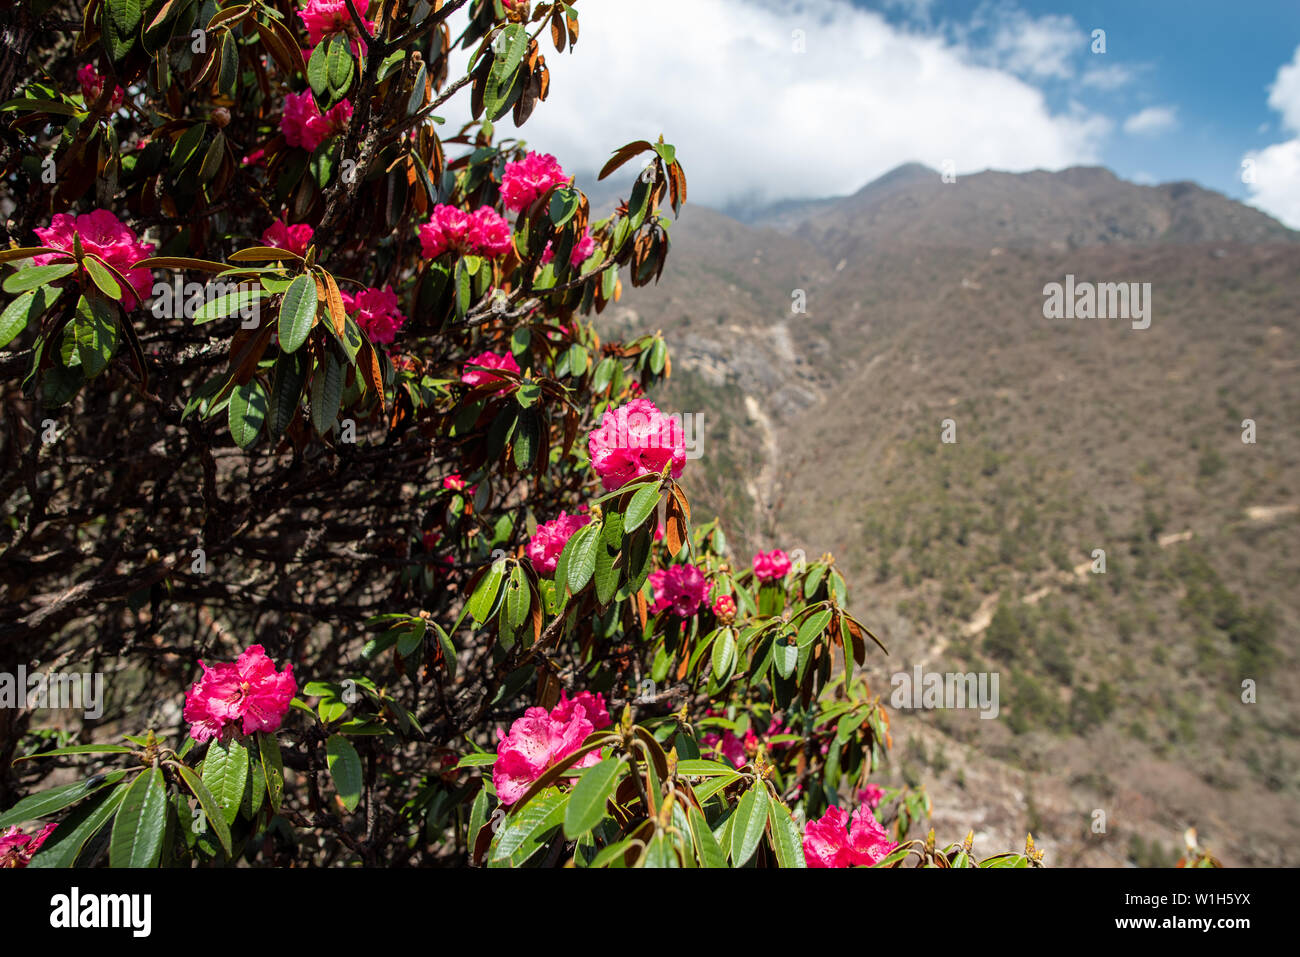 Bright pink blooming rhododendron flowers with defocused mountain scenery in background, in Nepal Himalayas Stock Photo